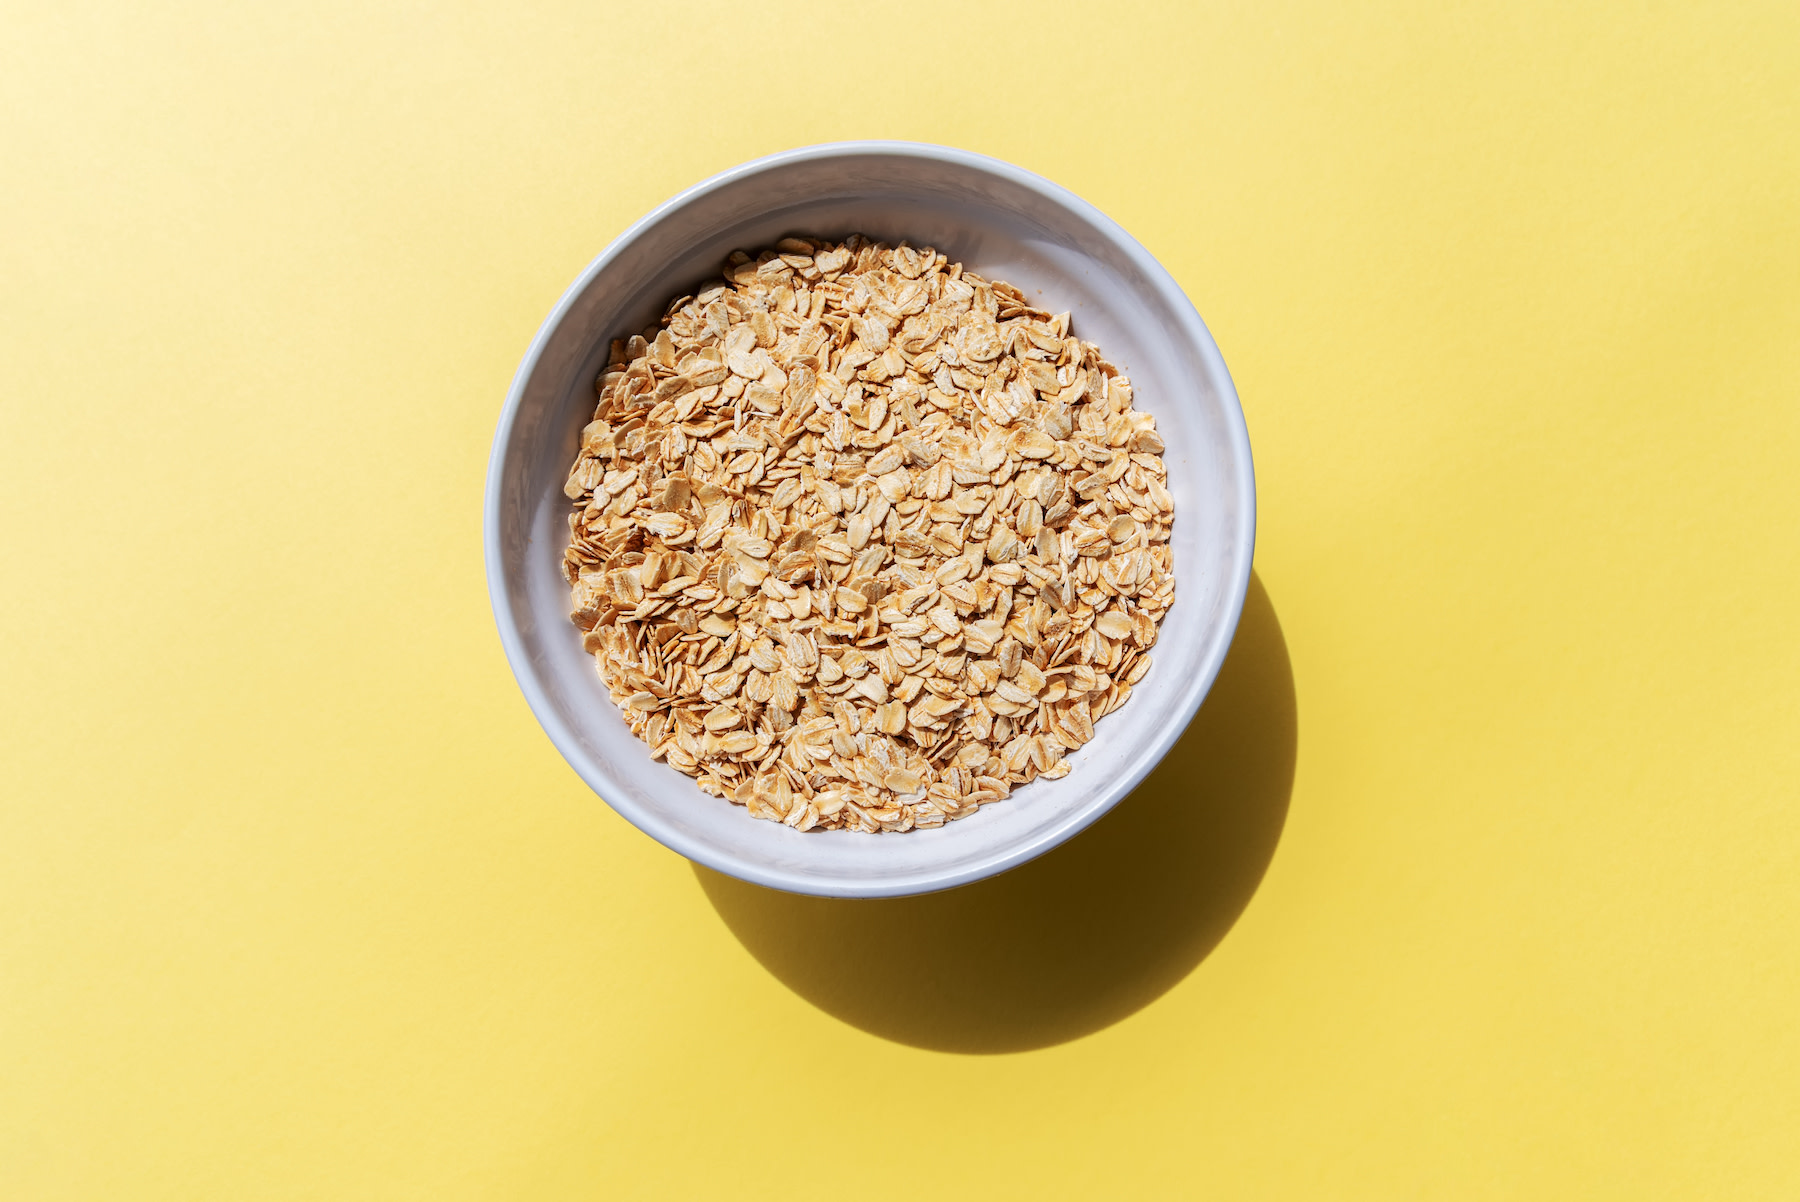 High-Fiber Foods: A bowl of oats on a yellow background.